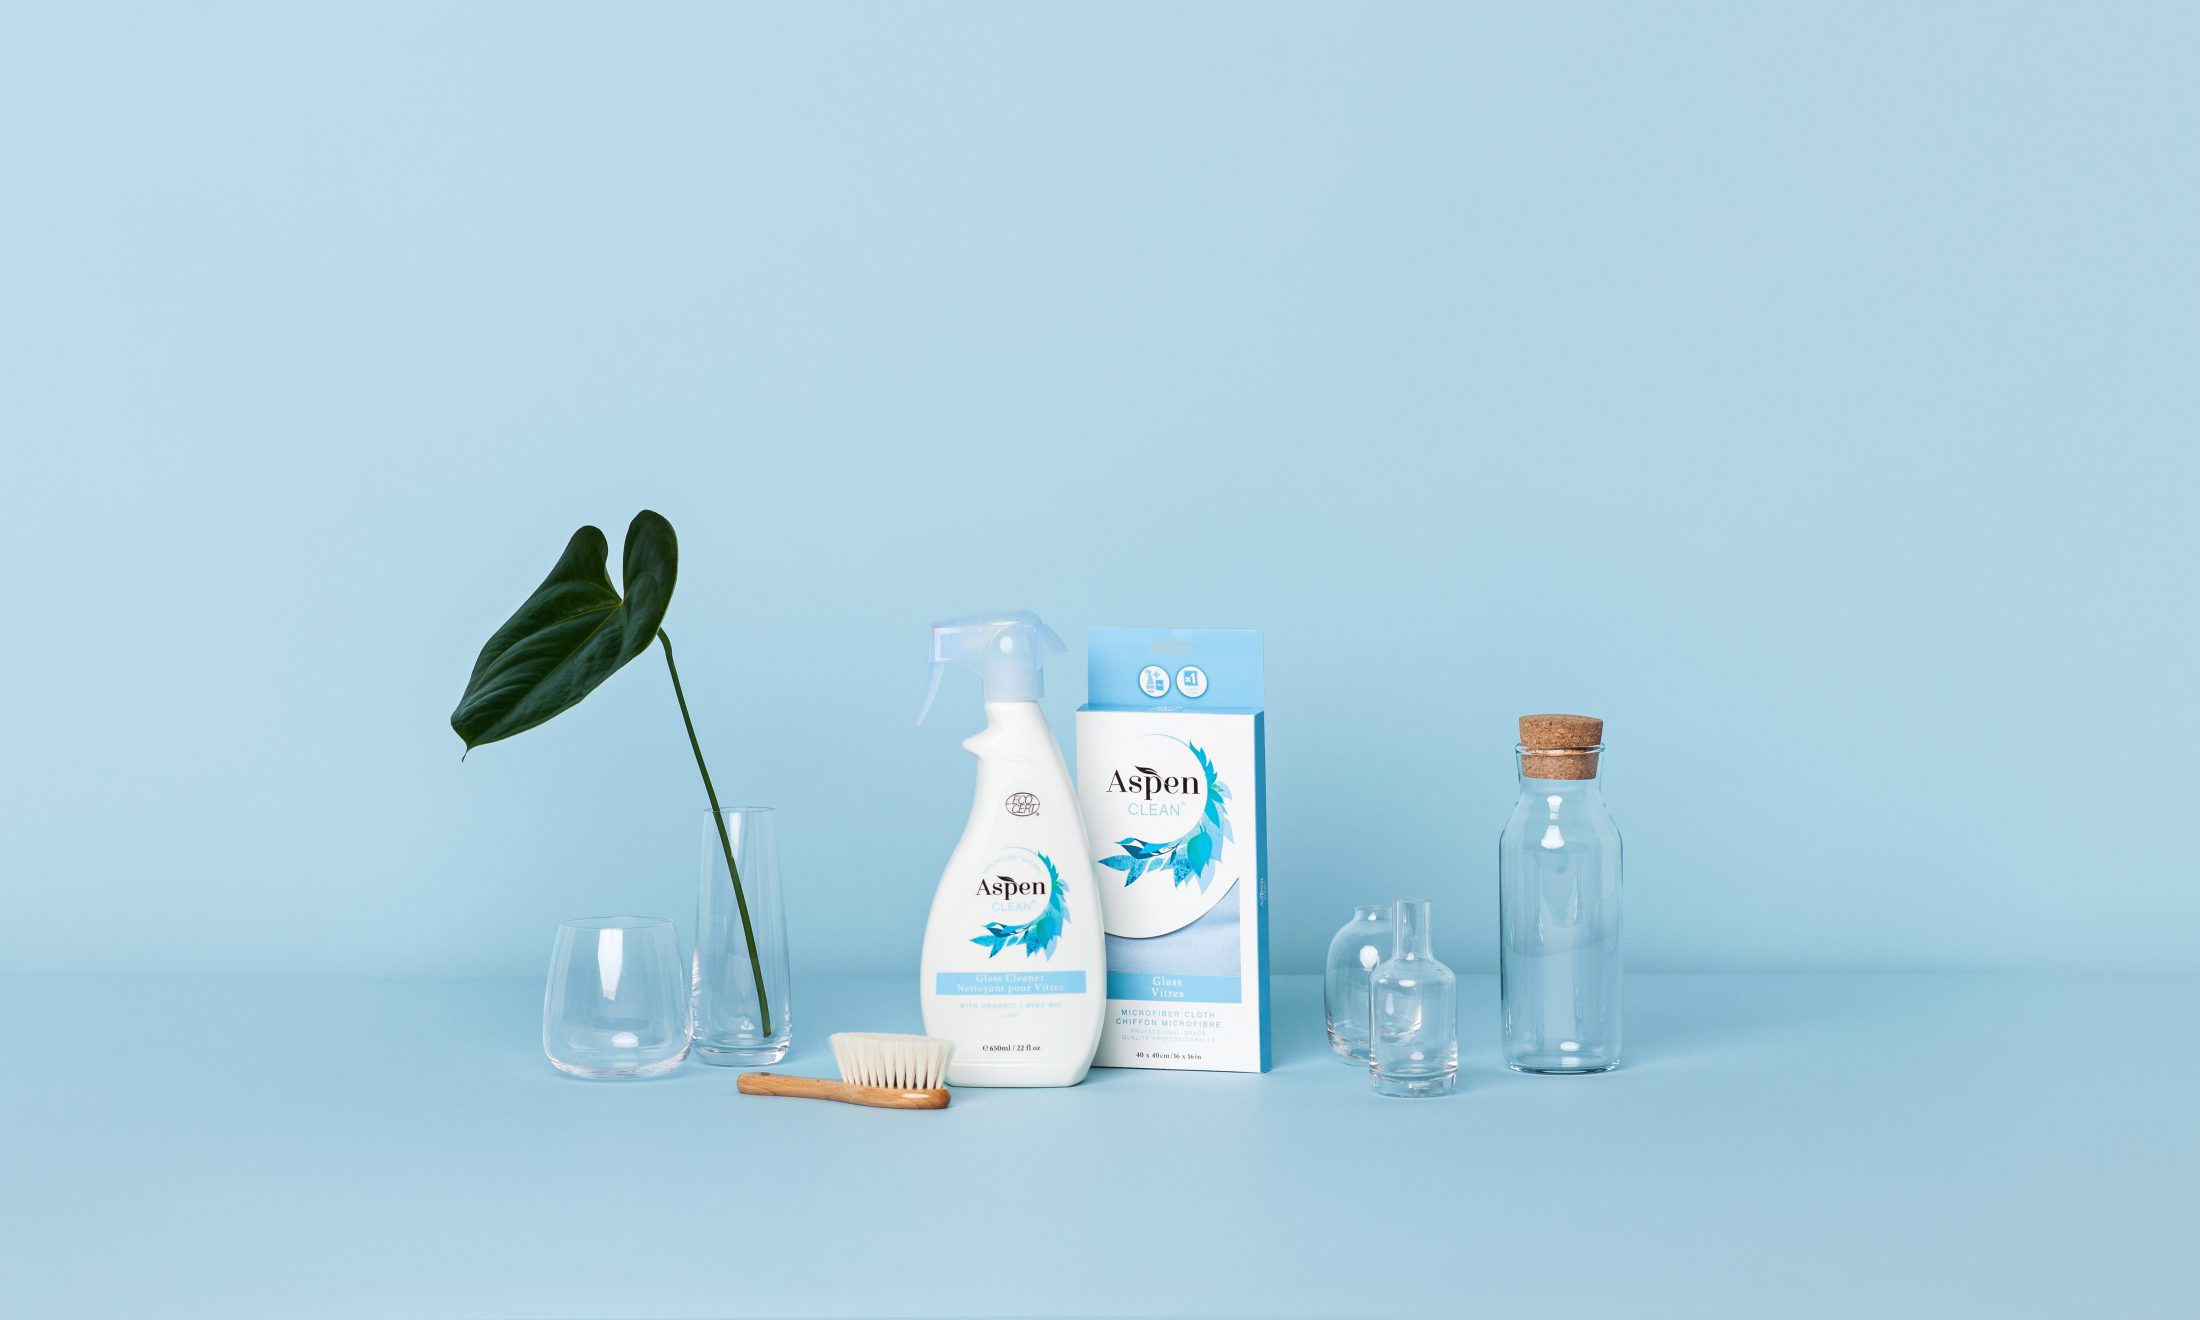 Aspen clean products